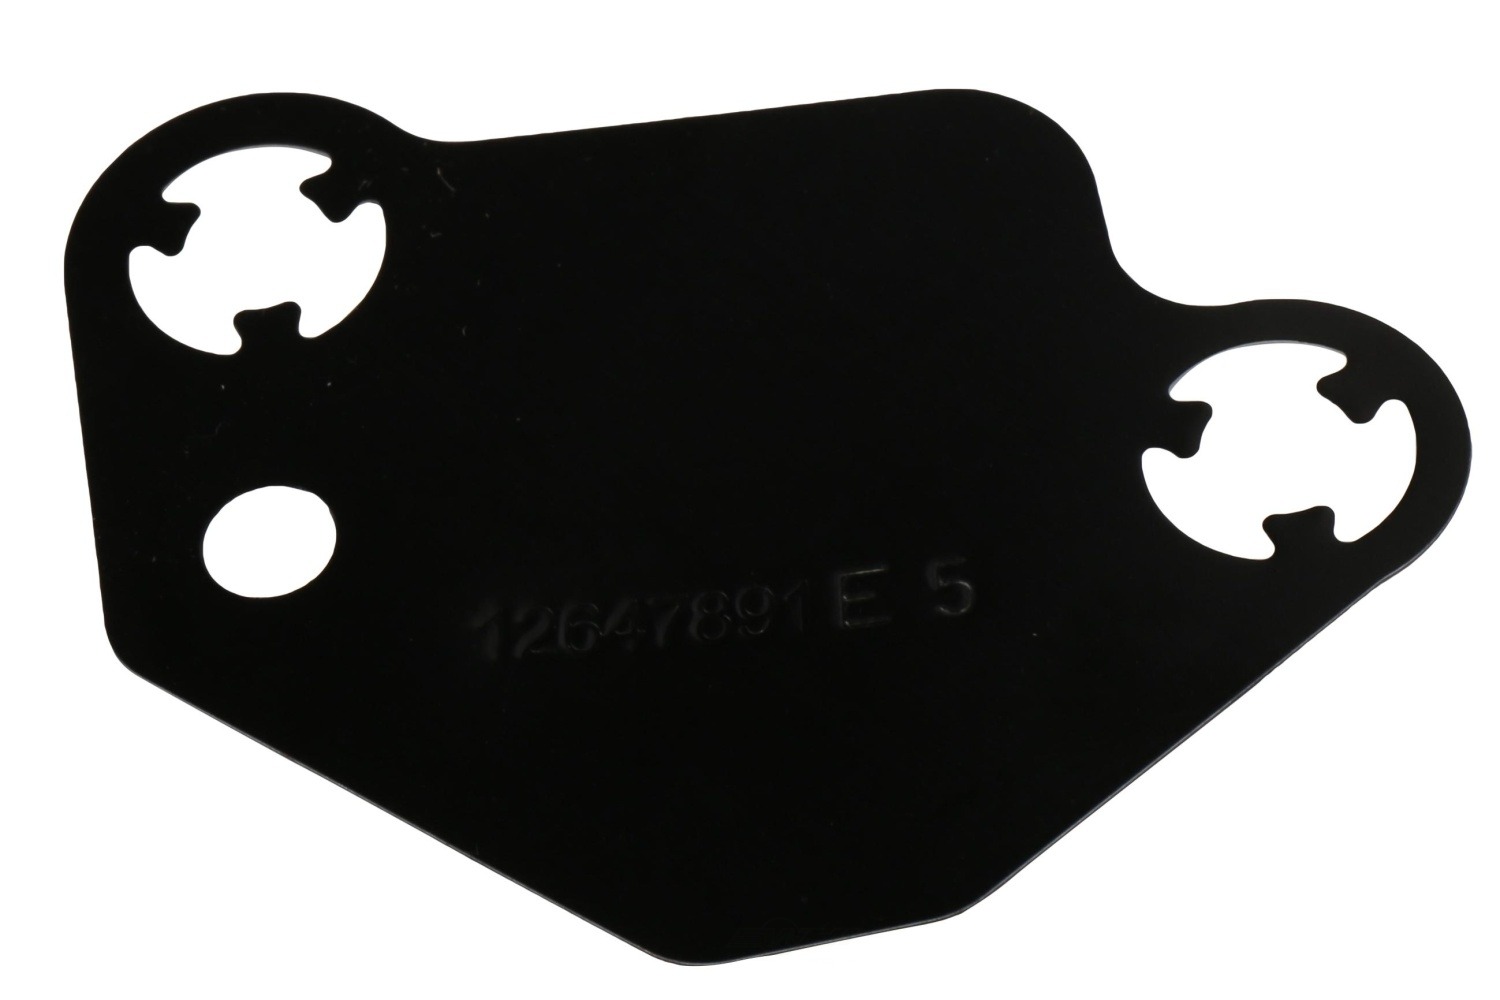 GM GENUINE PARTS - Engine Timing Cover Gasket - GMP 12647891